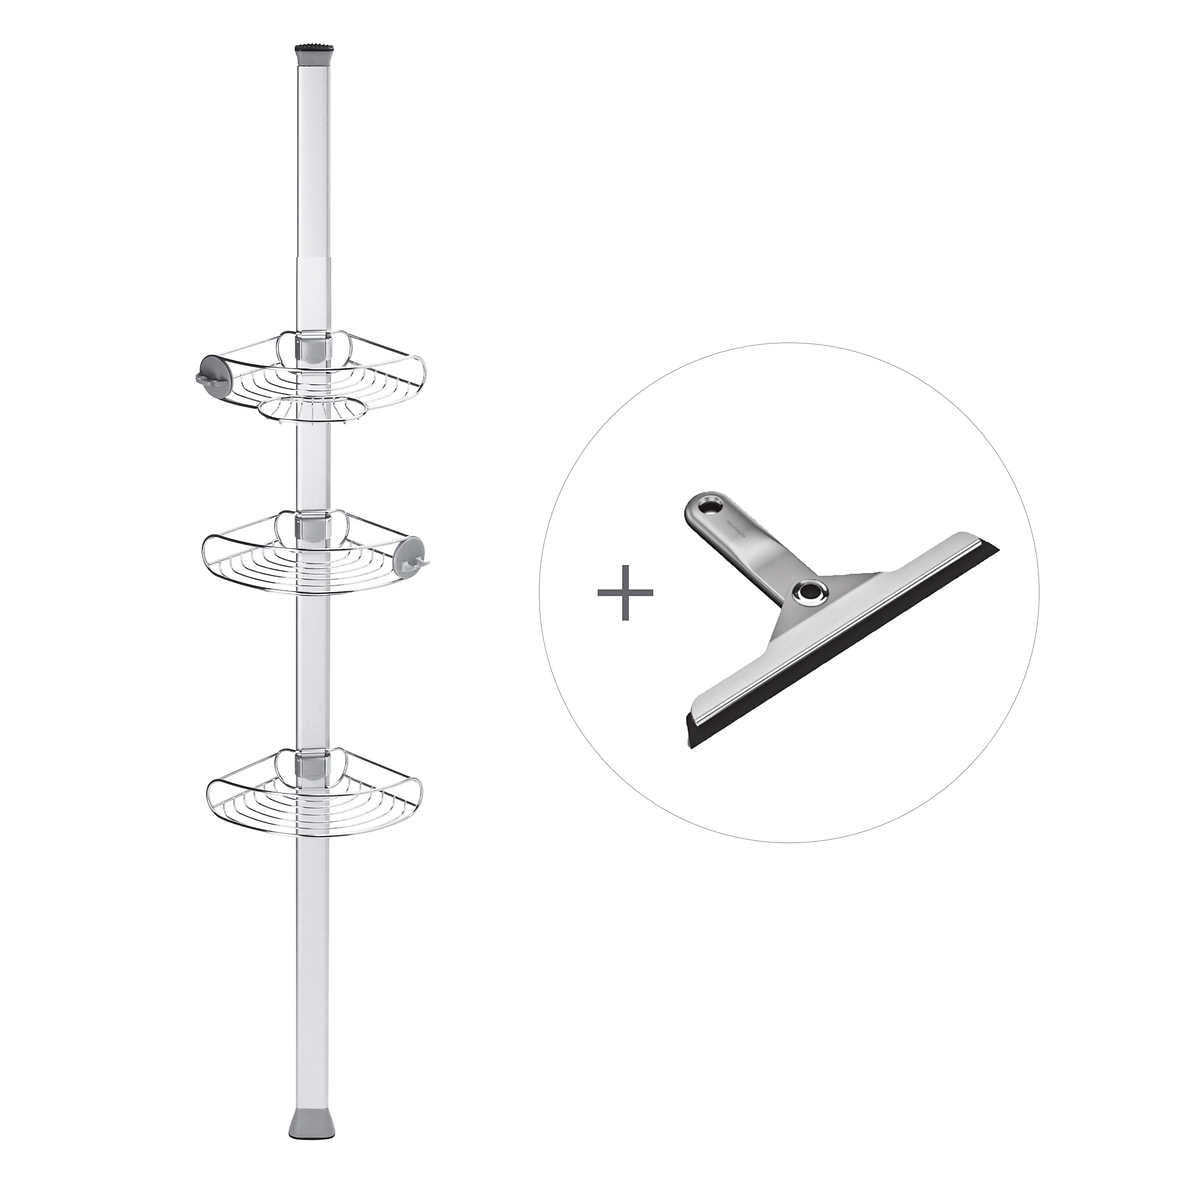 Review: simplehuman 8' Tension Pole Shower Caddy 